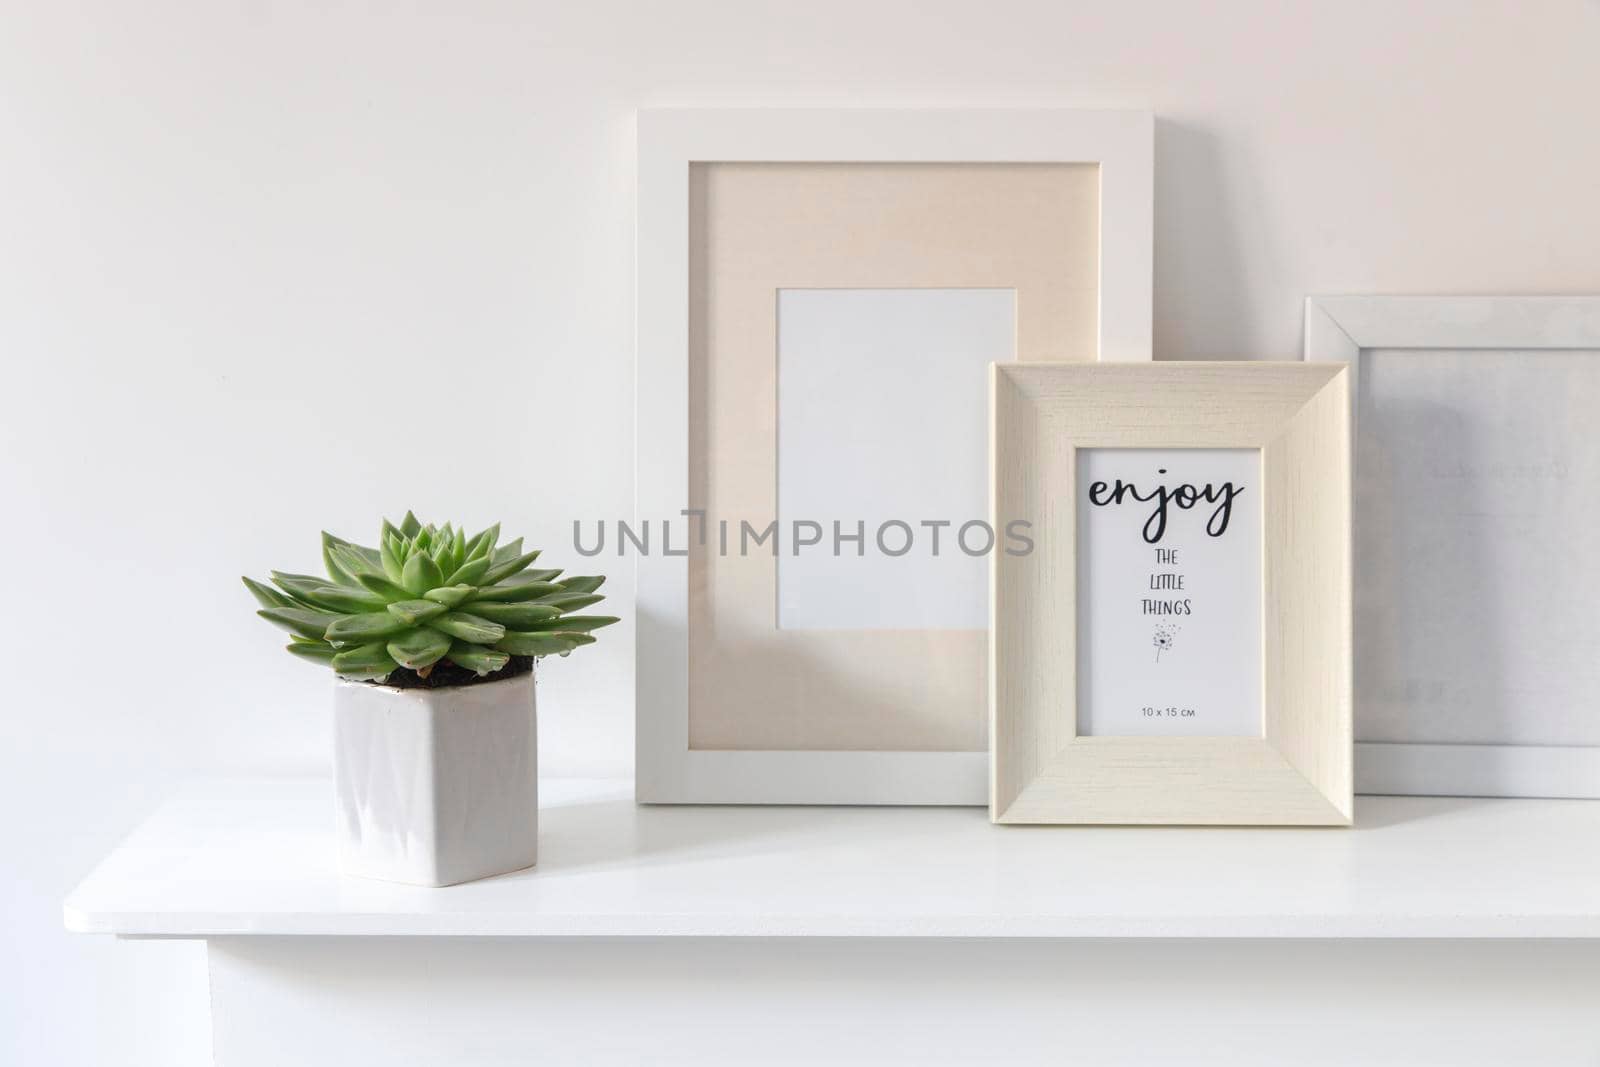 Echeveria in a geometric vase, photo frames on a chest of drawers against a white wall. Scandinavian style. Ready layout.